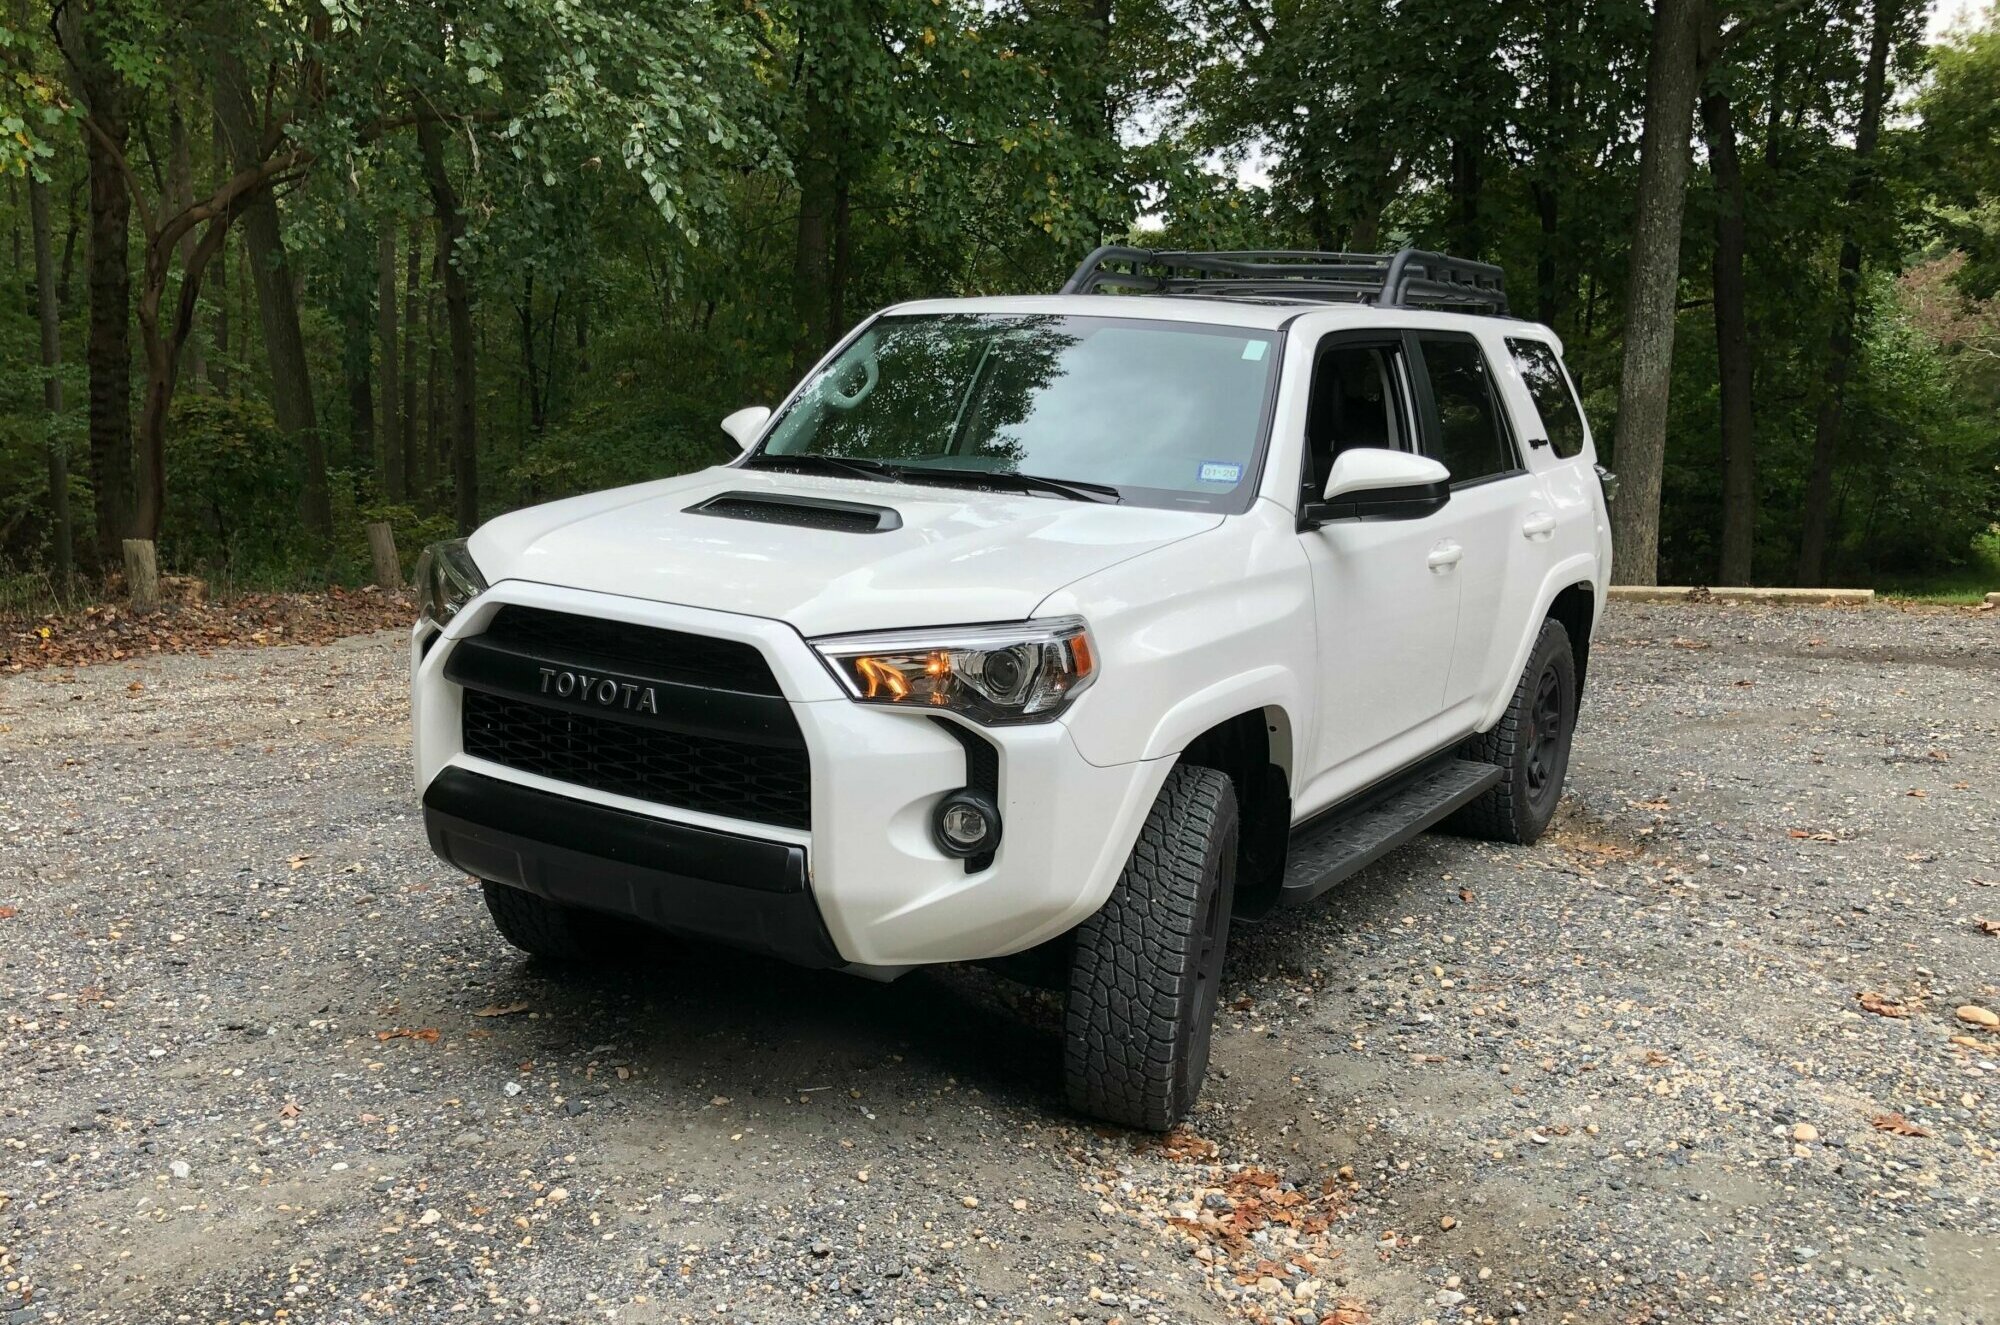 Car Review Toyota’s 4Runner TRD PRO is a capable offroader and old